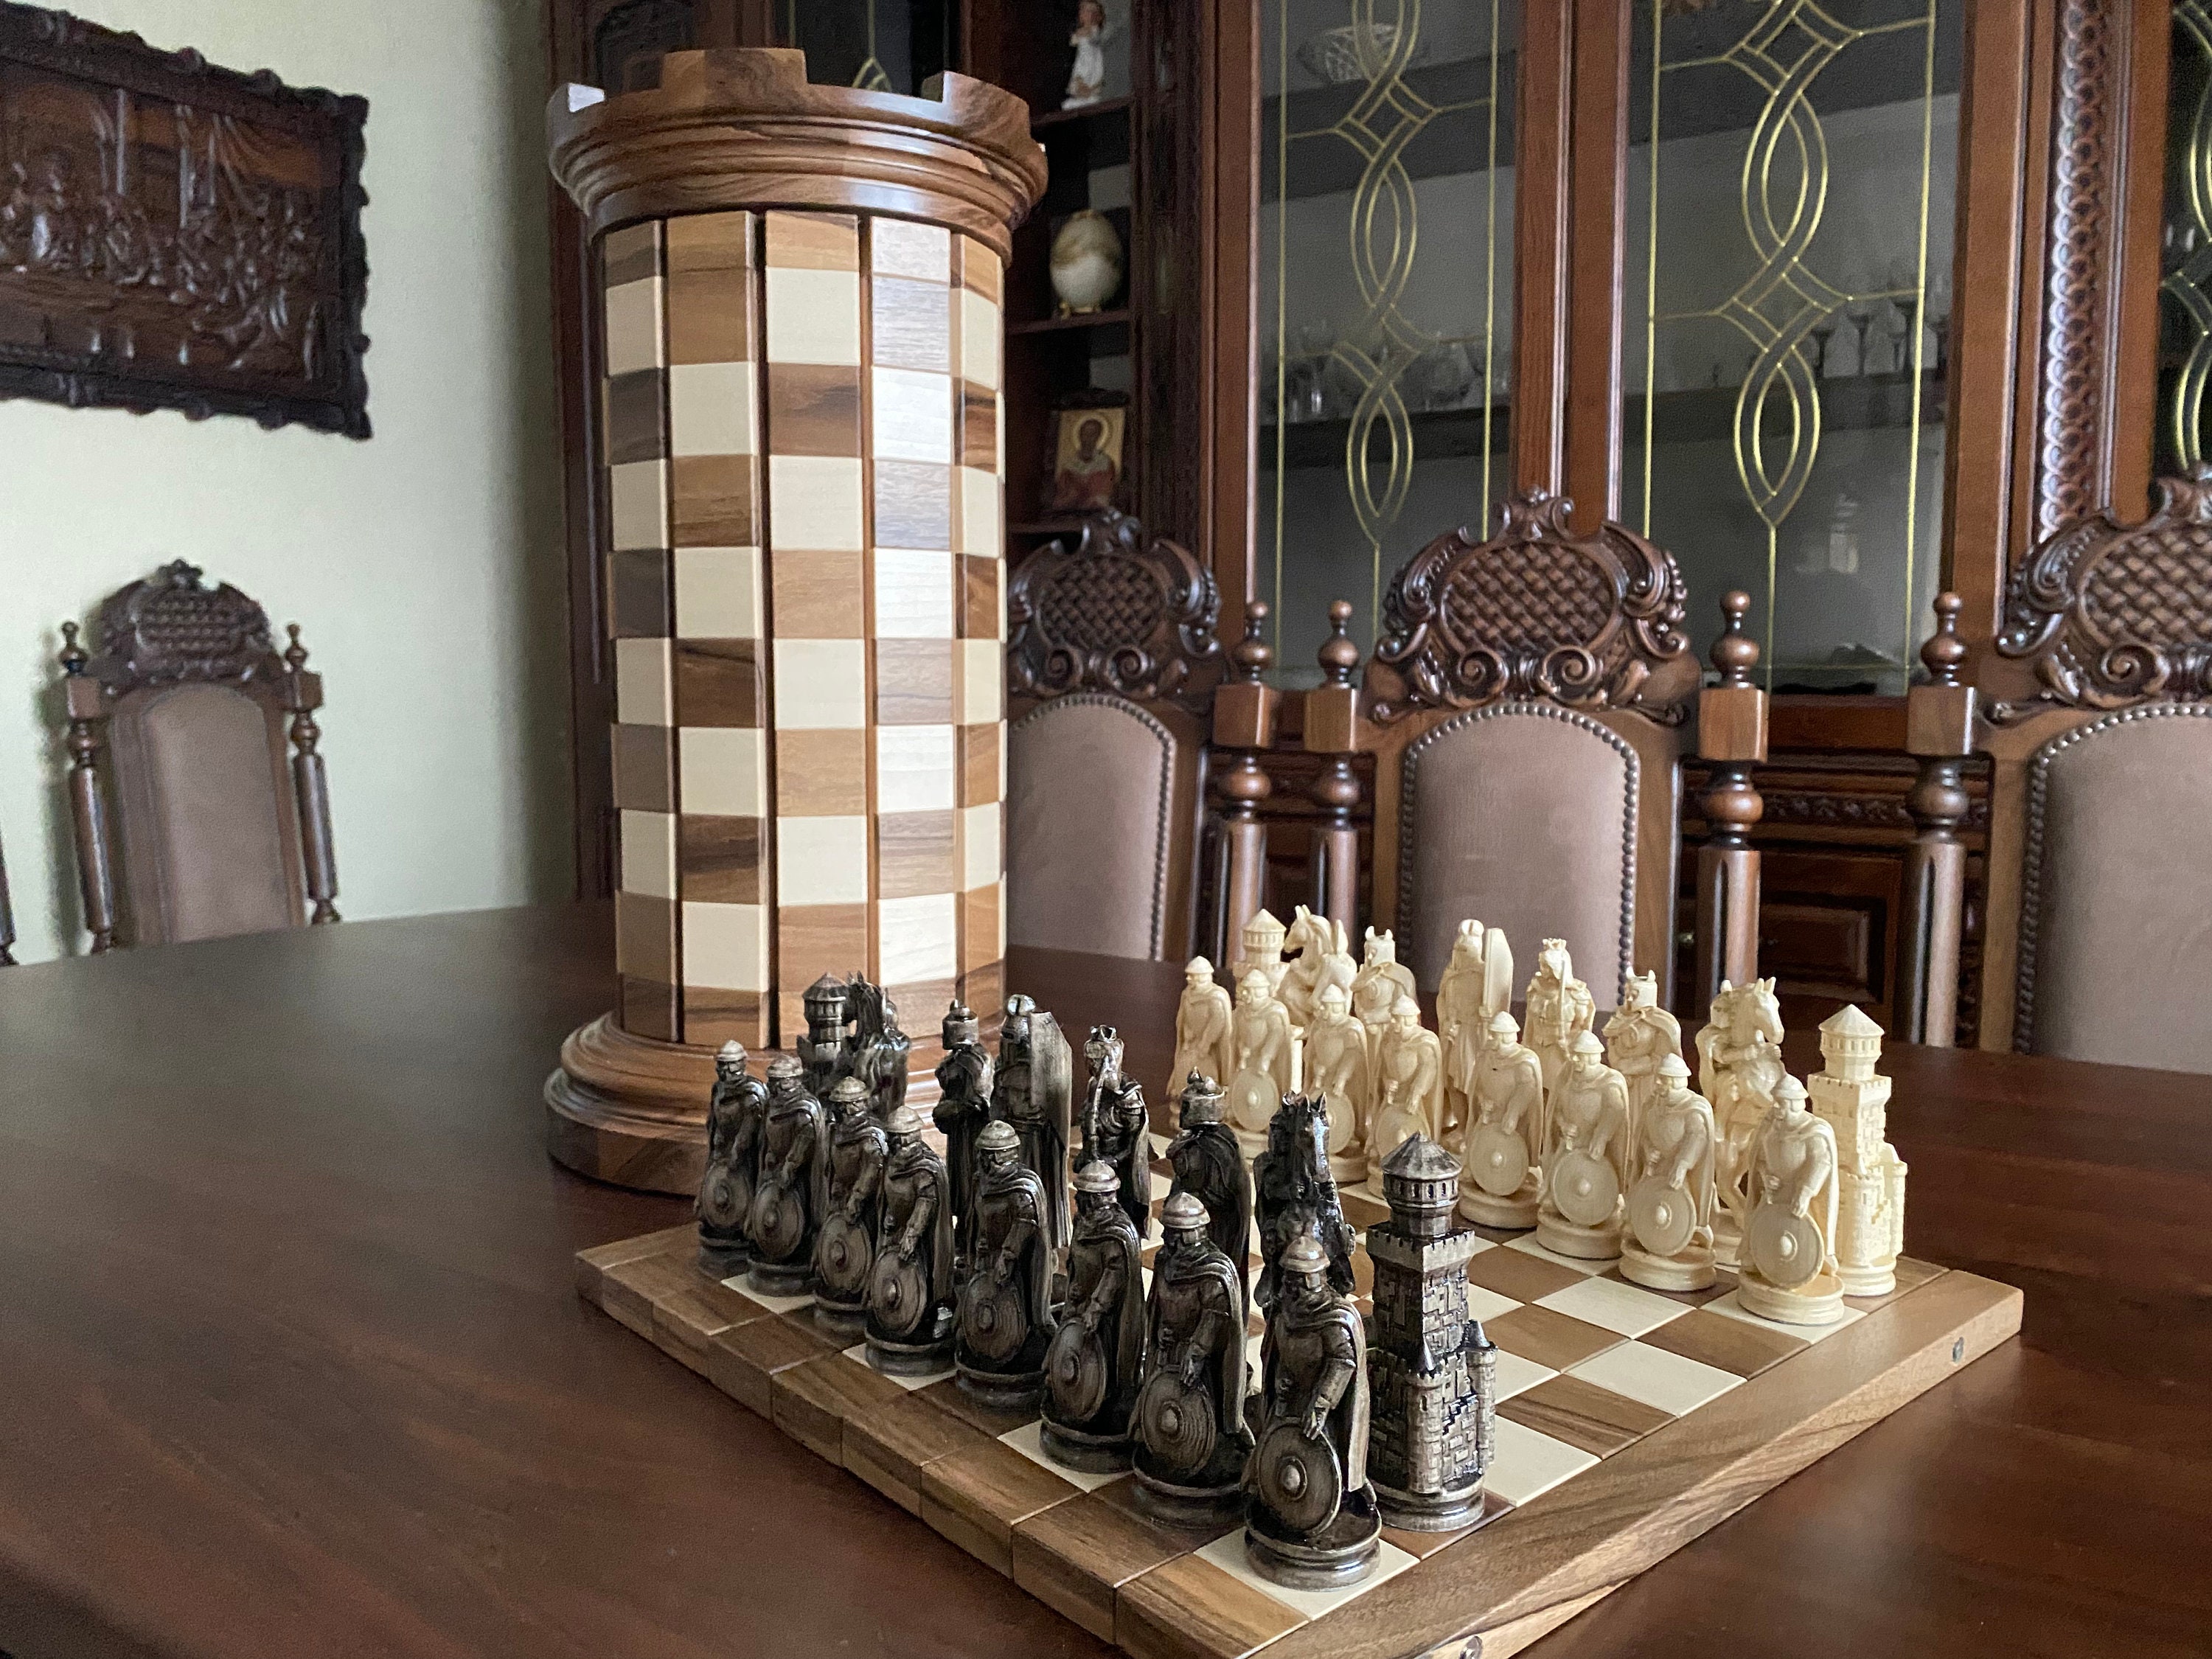 Massive chess set is playing for keeps - The Brothers Brick